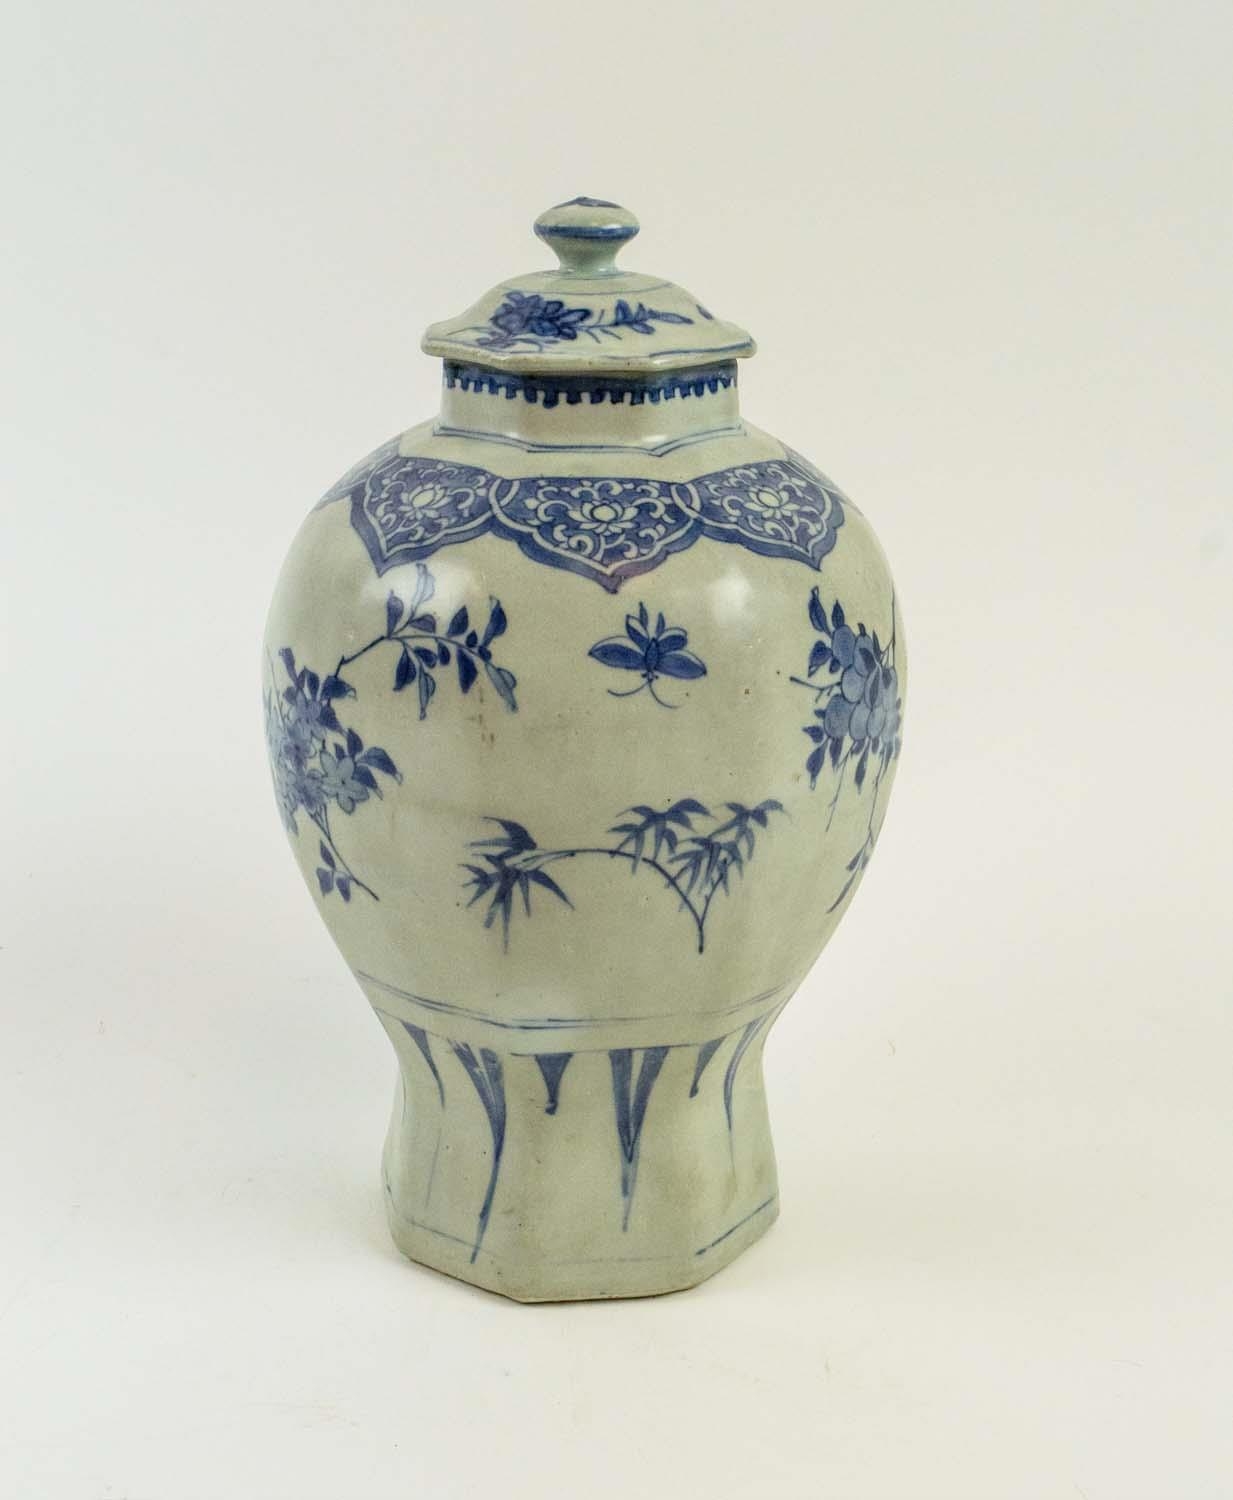 TRANSITIONAL 'HATCHER CARGO' OCTAGONAL BLUE AND WHITE BALUSTER VASE, circa 1640, with lid, decorated - Image 2 of 5